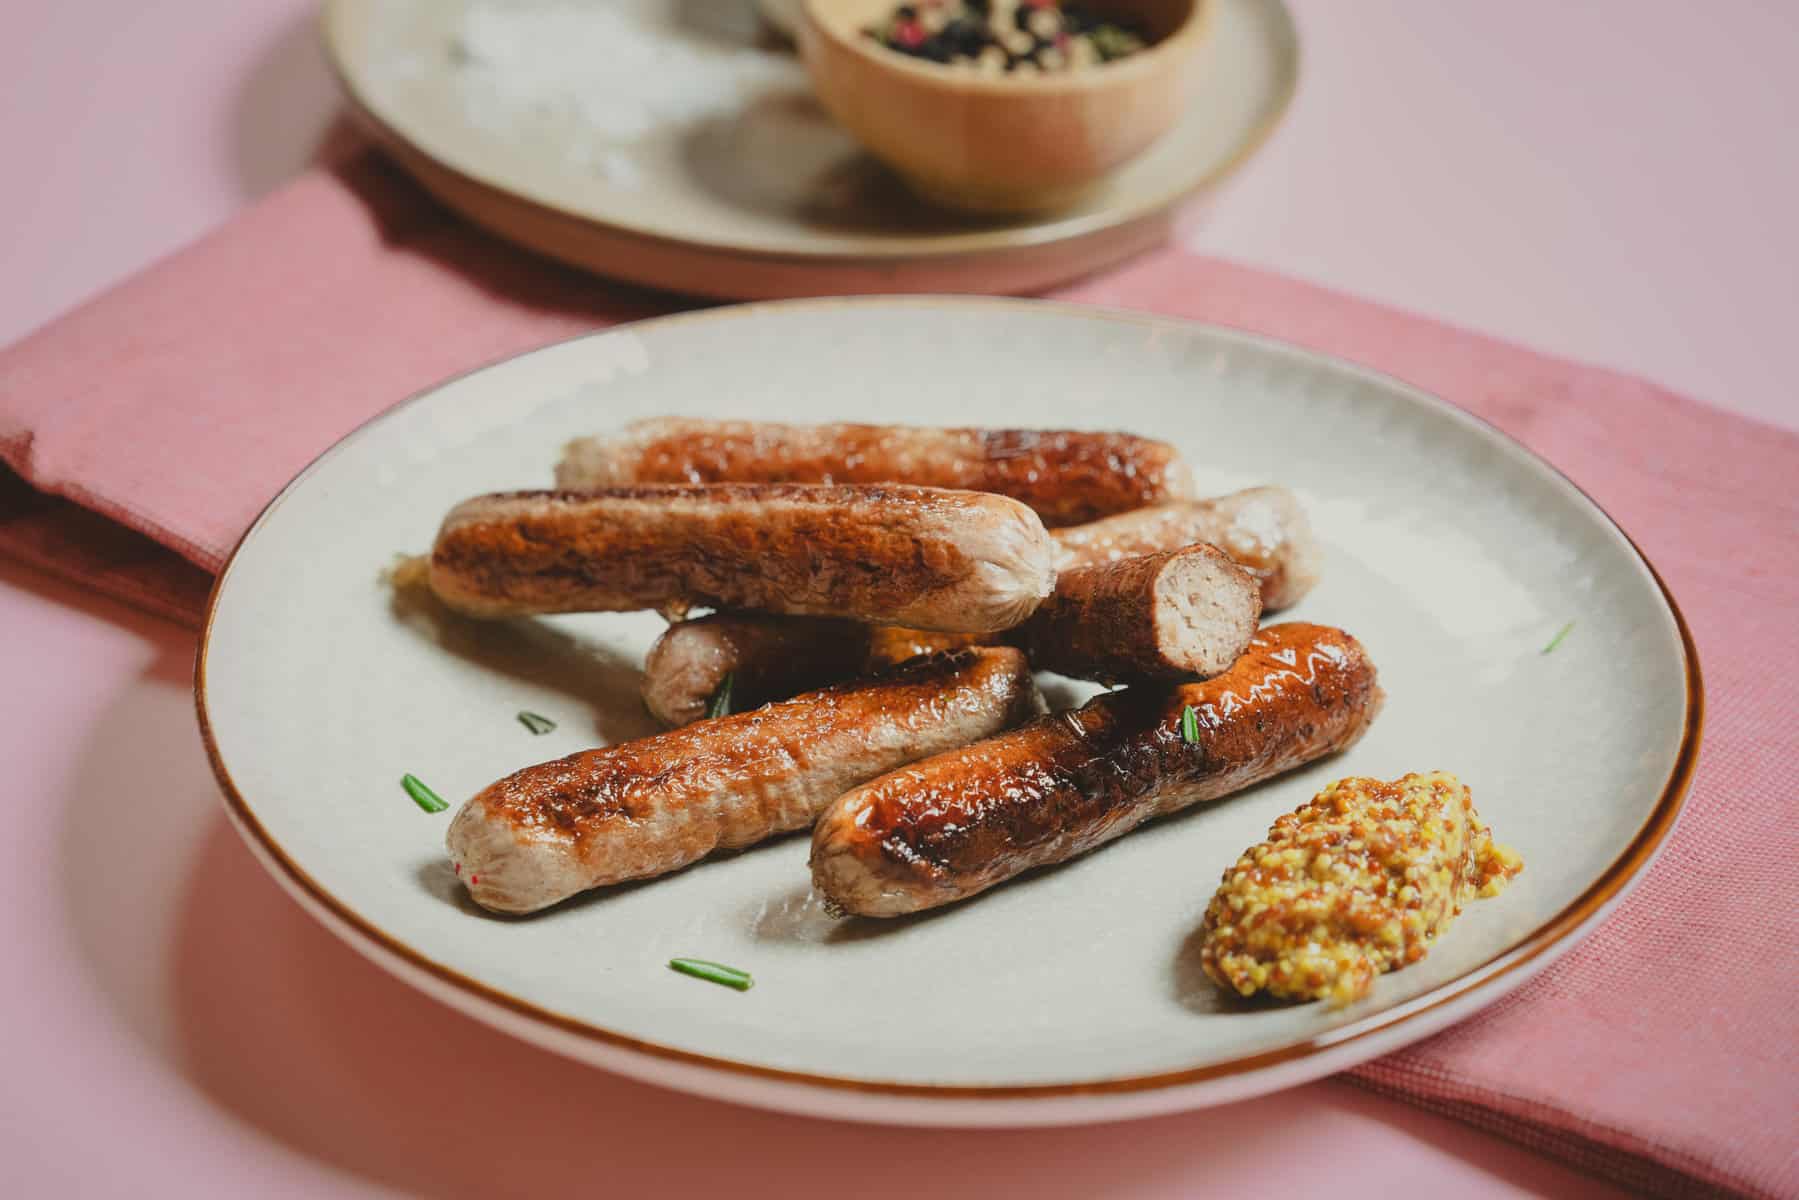 Cultivated pork sausages